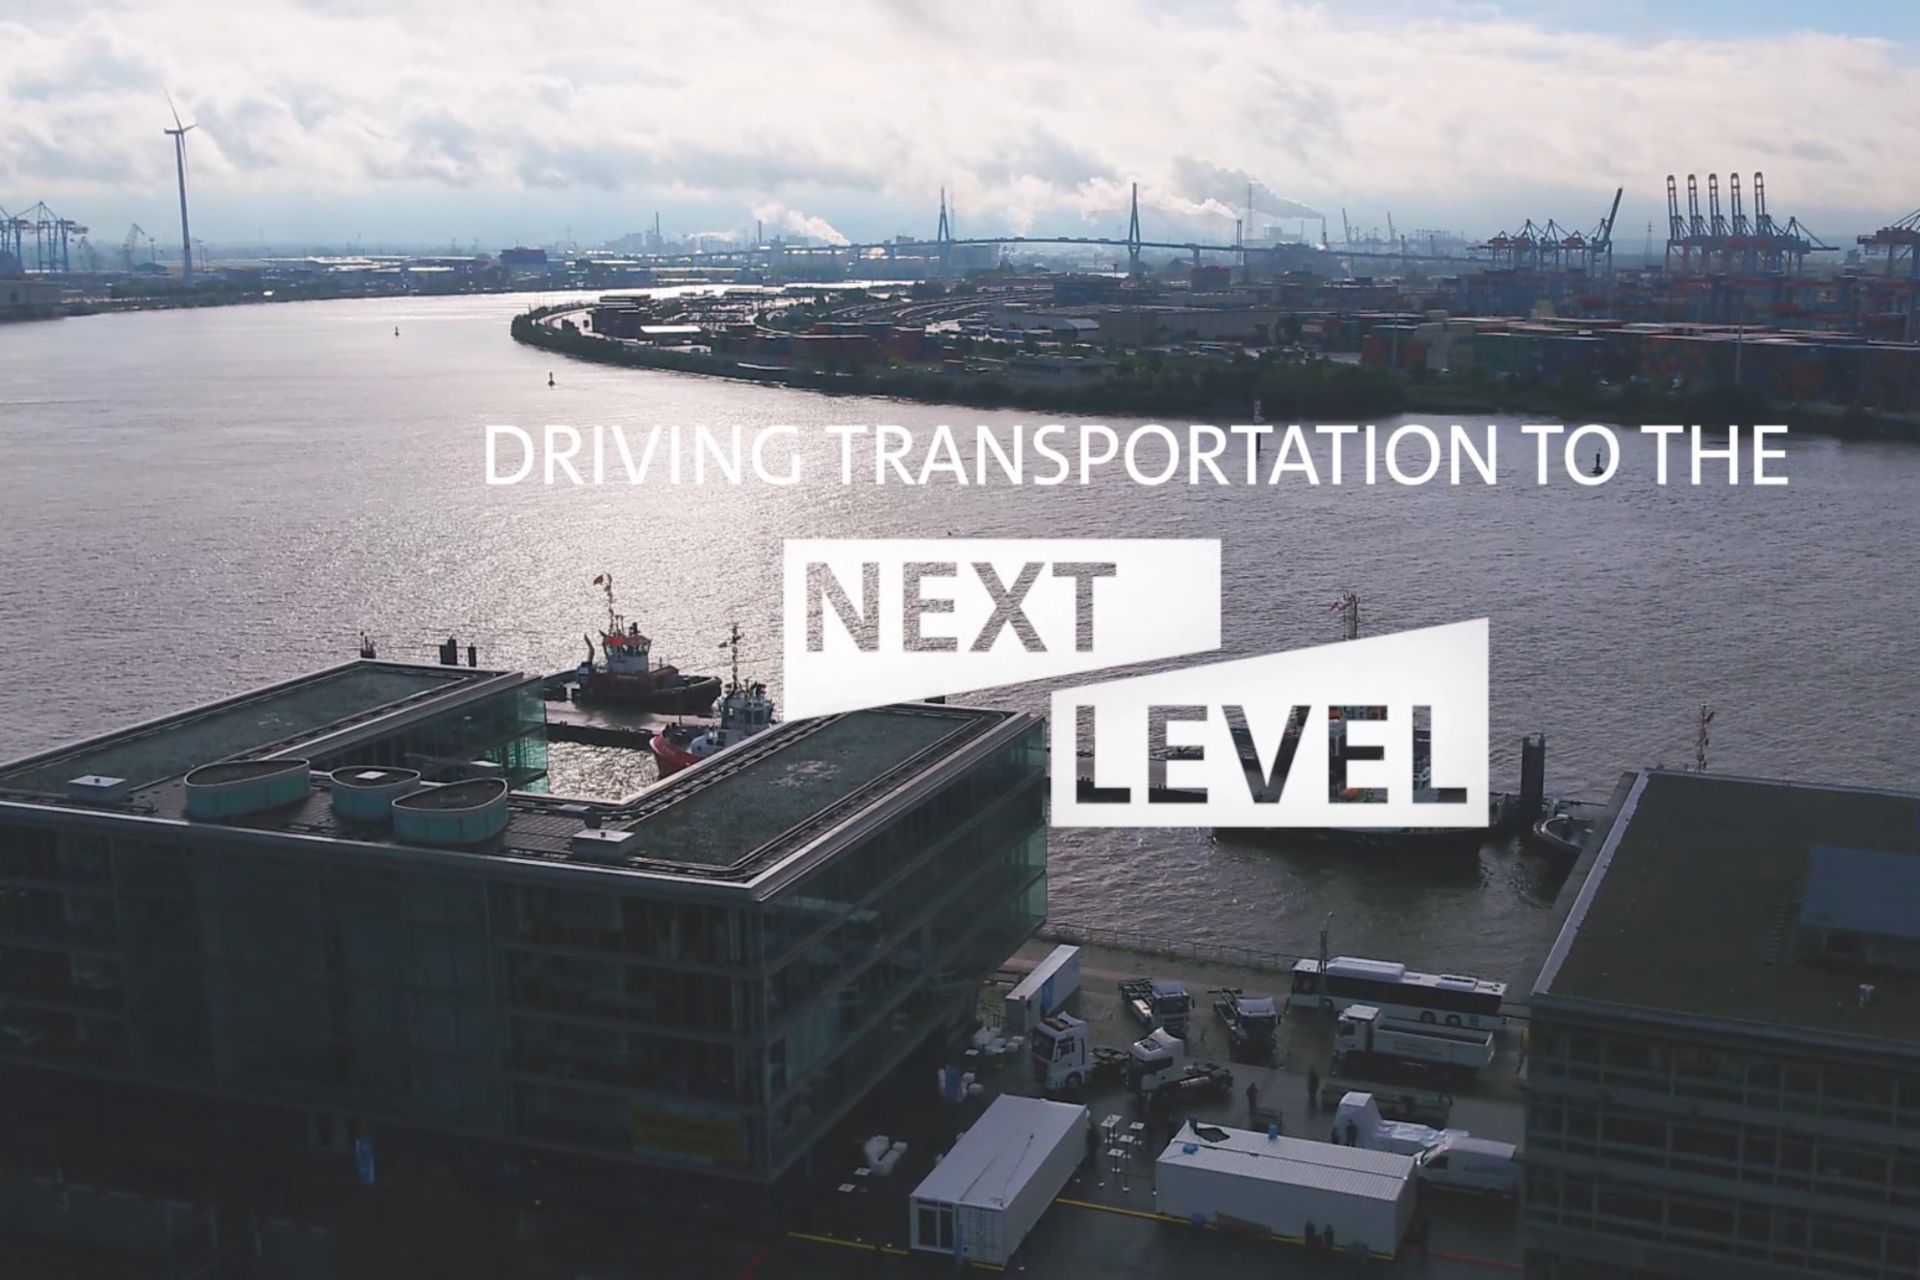 Text saying driving transportation to the next level over image of industrial harbour 
                 